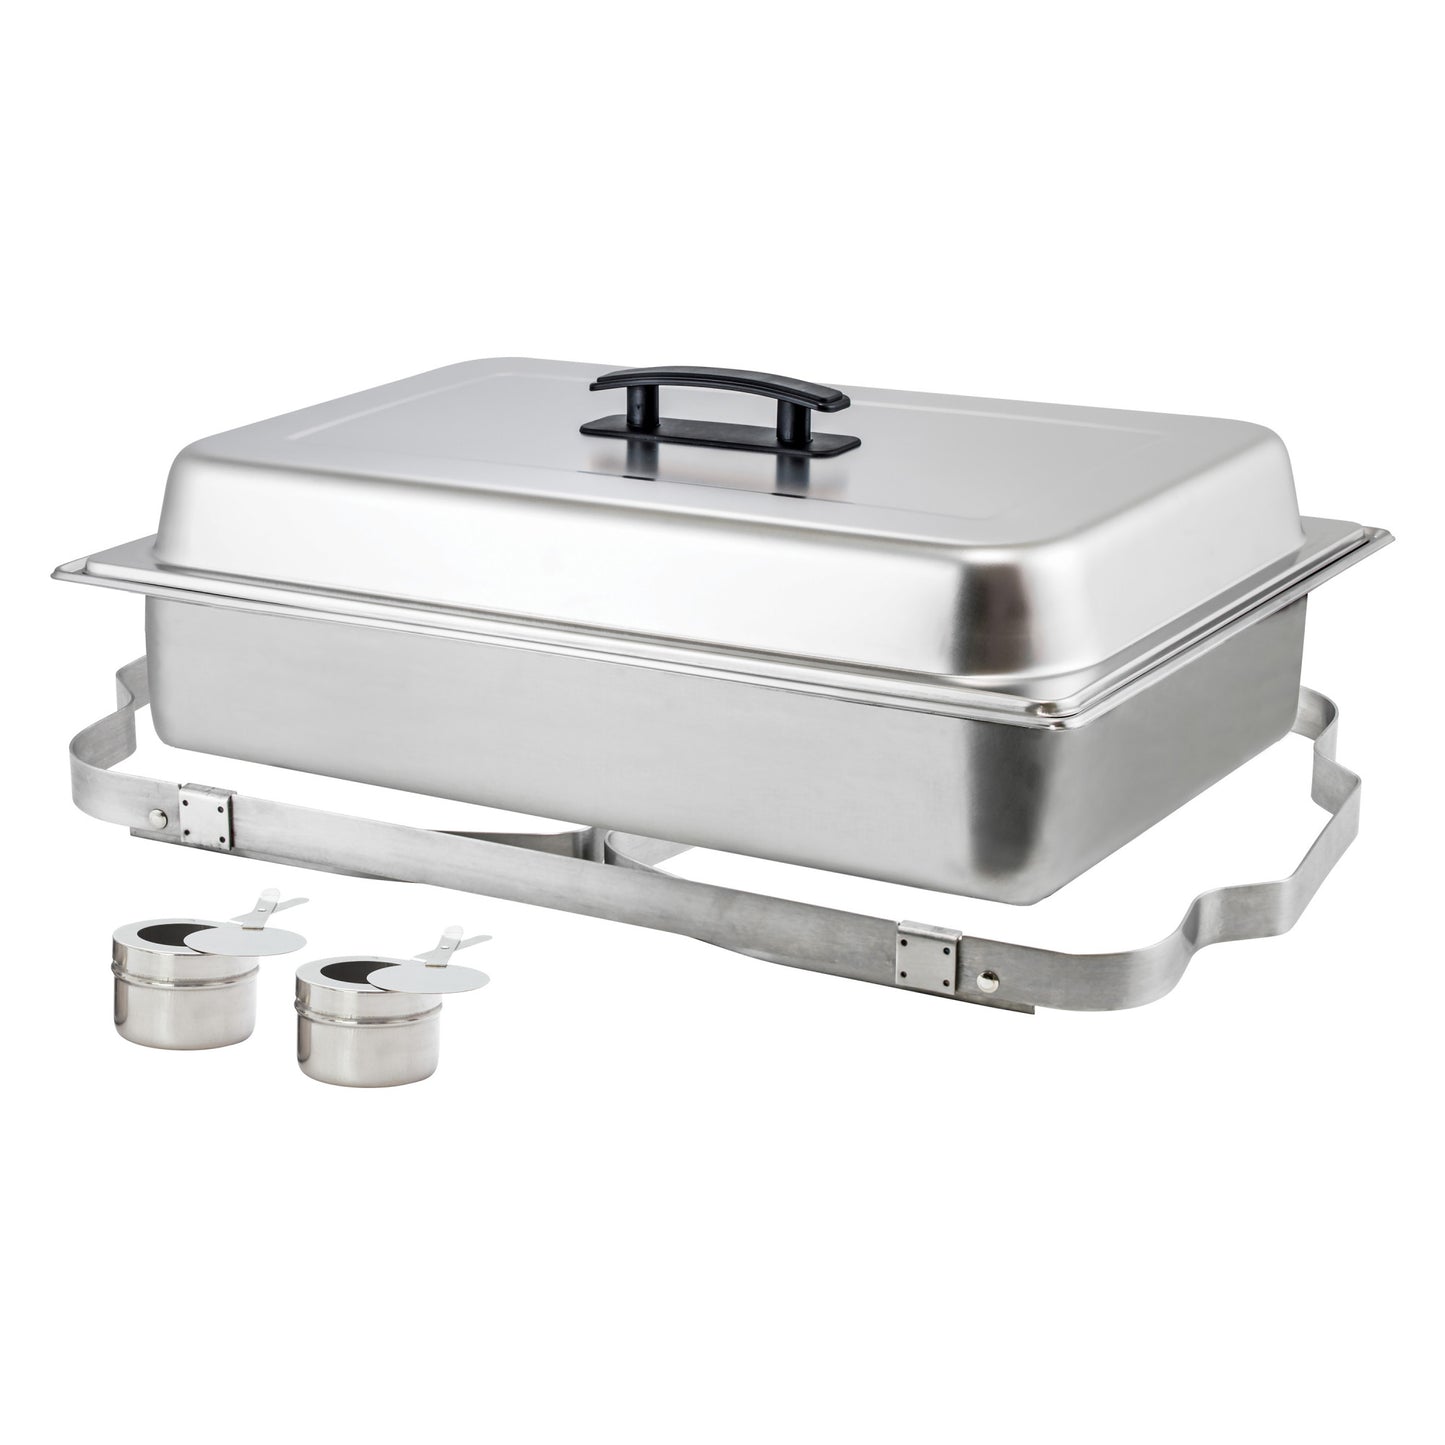 C-4080 - 8 Quart Full-Size Folding Stand Chafer, Stainless Steel